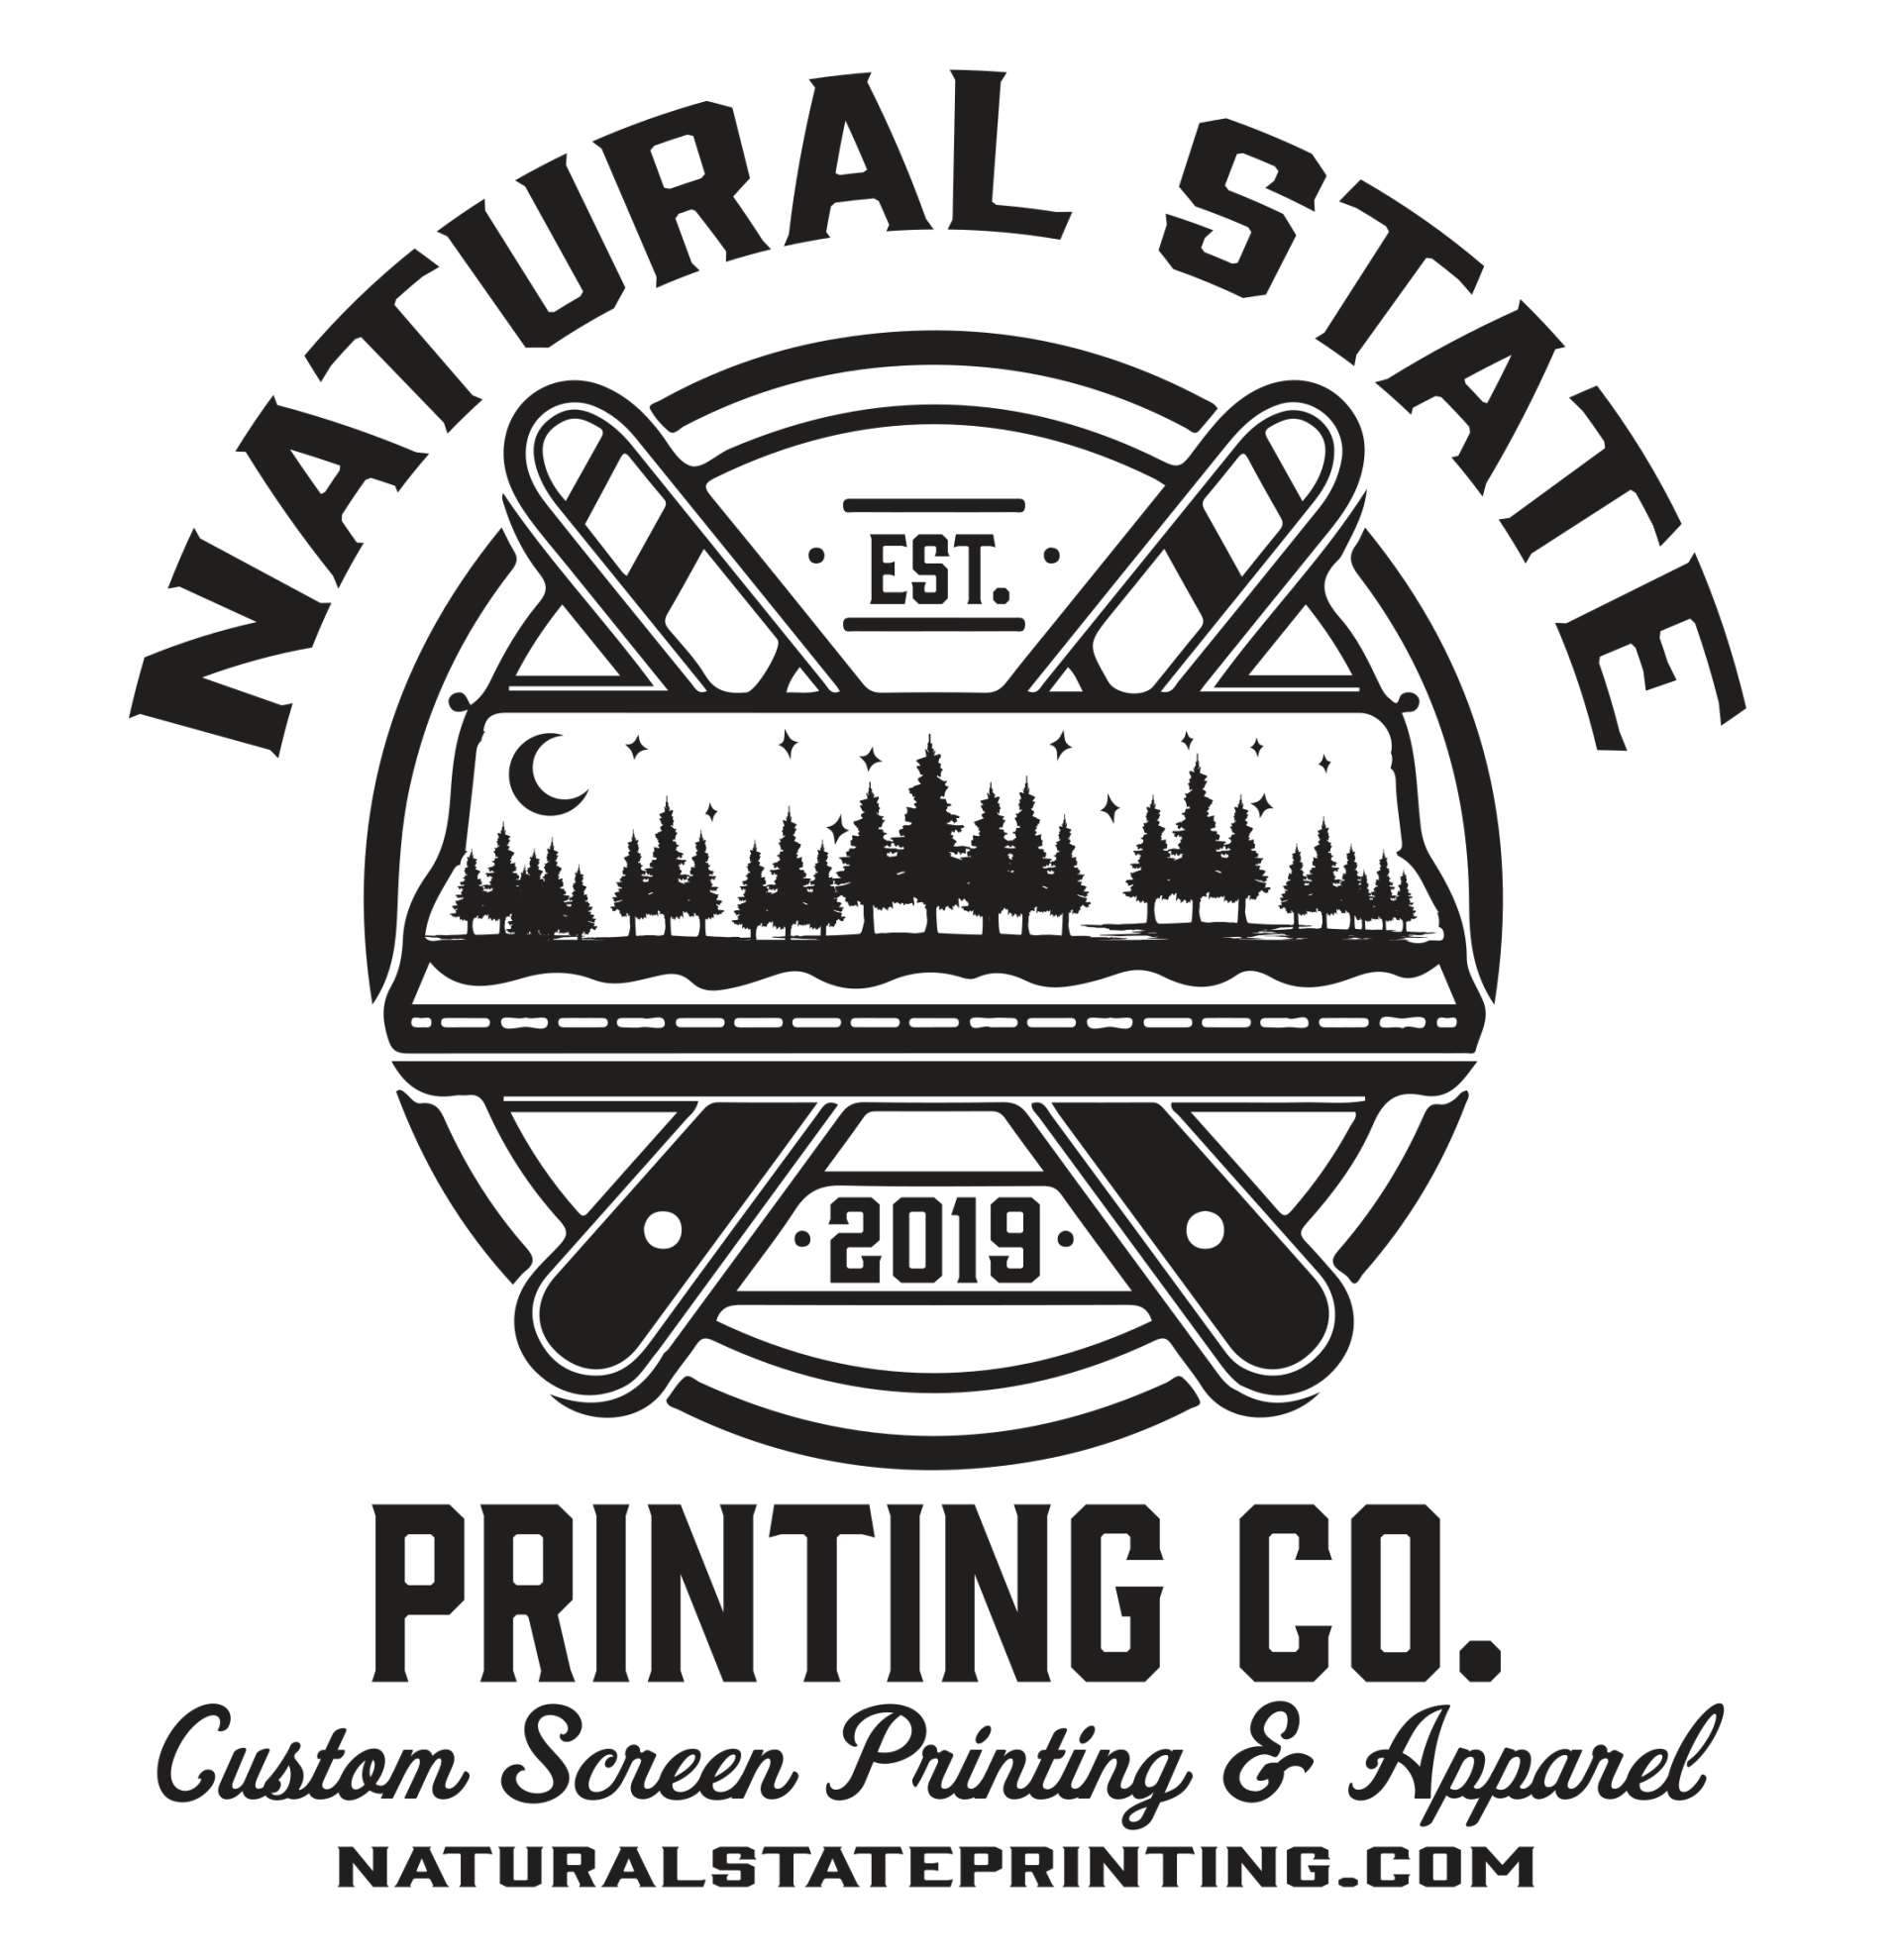 a black and white logo for natural state printing co.